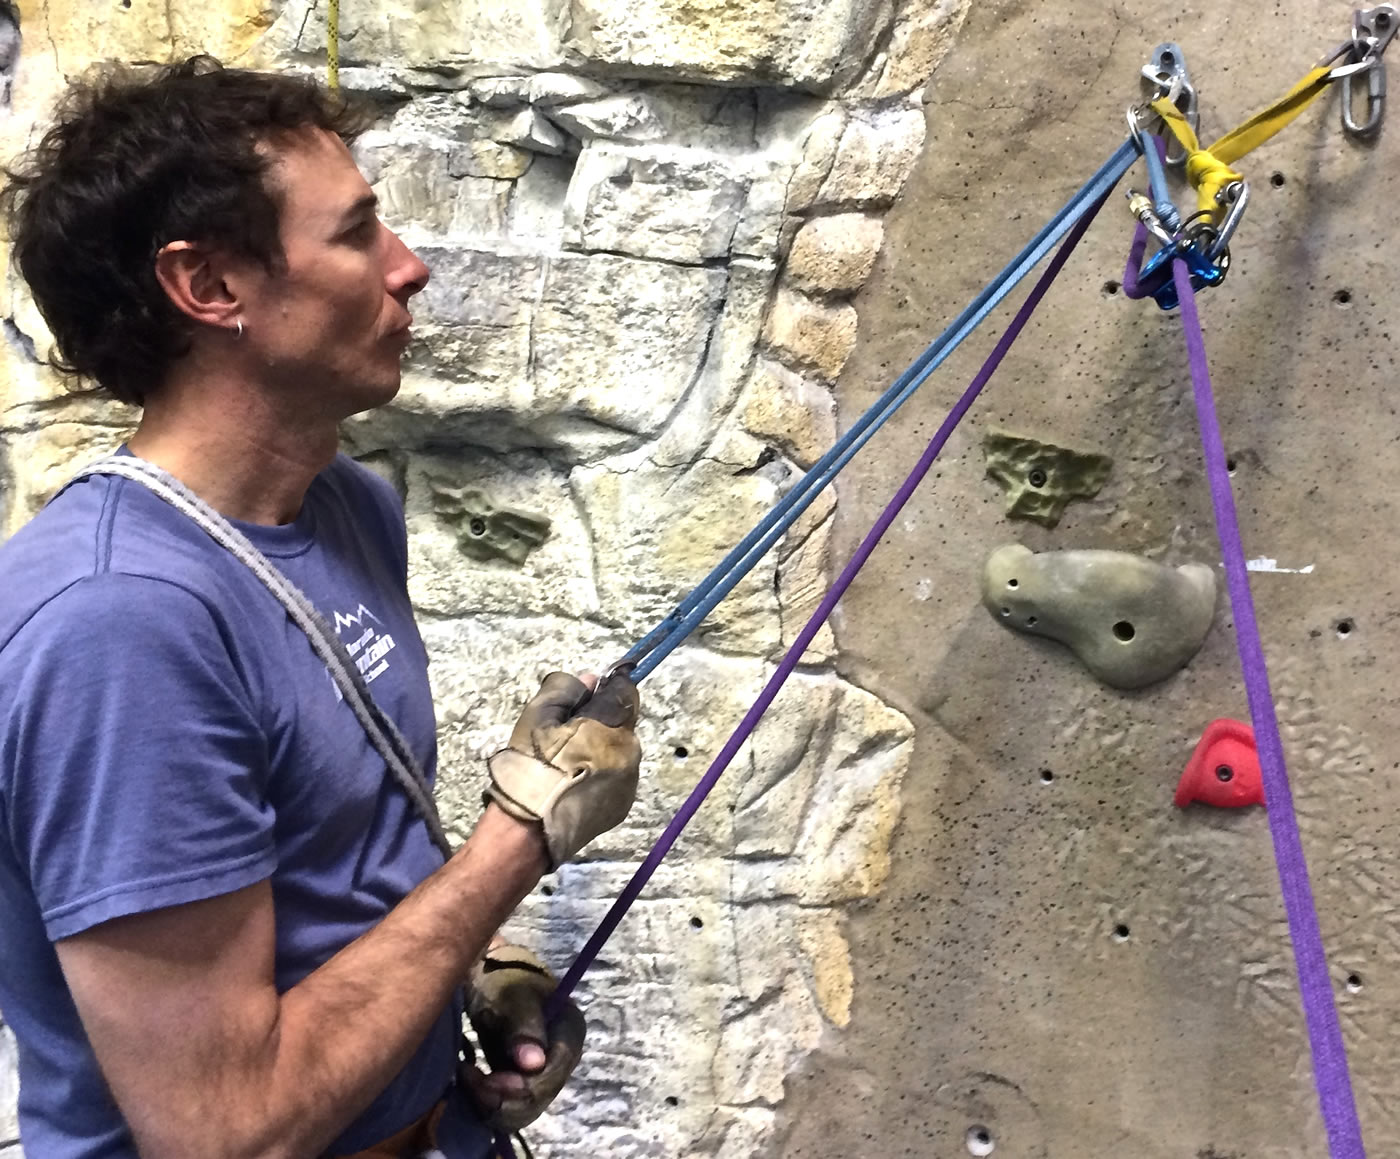 Mike Lewis demonstrates how to lower a climber while in guide mode with the DMM Pivot: The belayer can set up a sling to pull back the carabiner on the rope and release the friction on the brake-end of the rope, allowing it to slide through the device while maintaining control with the brake hand. It may be necessary to use a backup on the brake-side of the rope to ensure control.